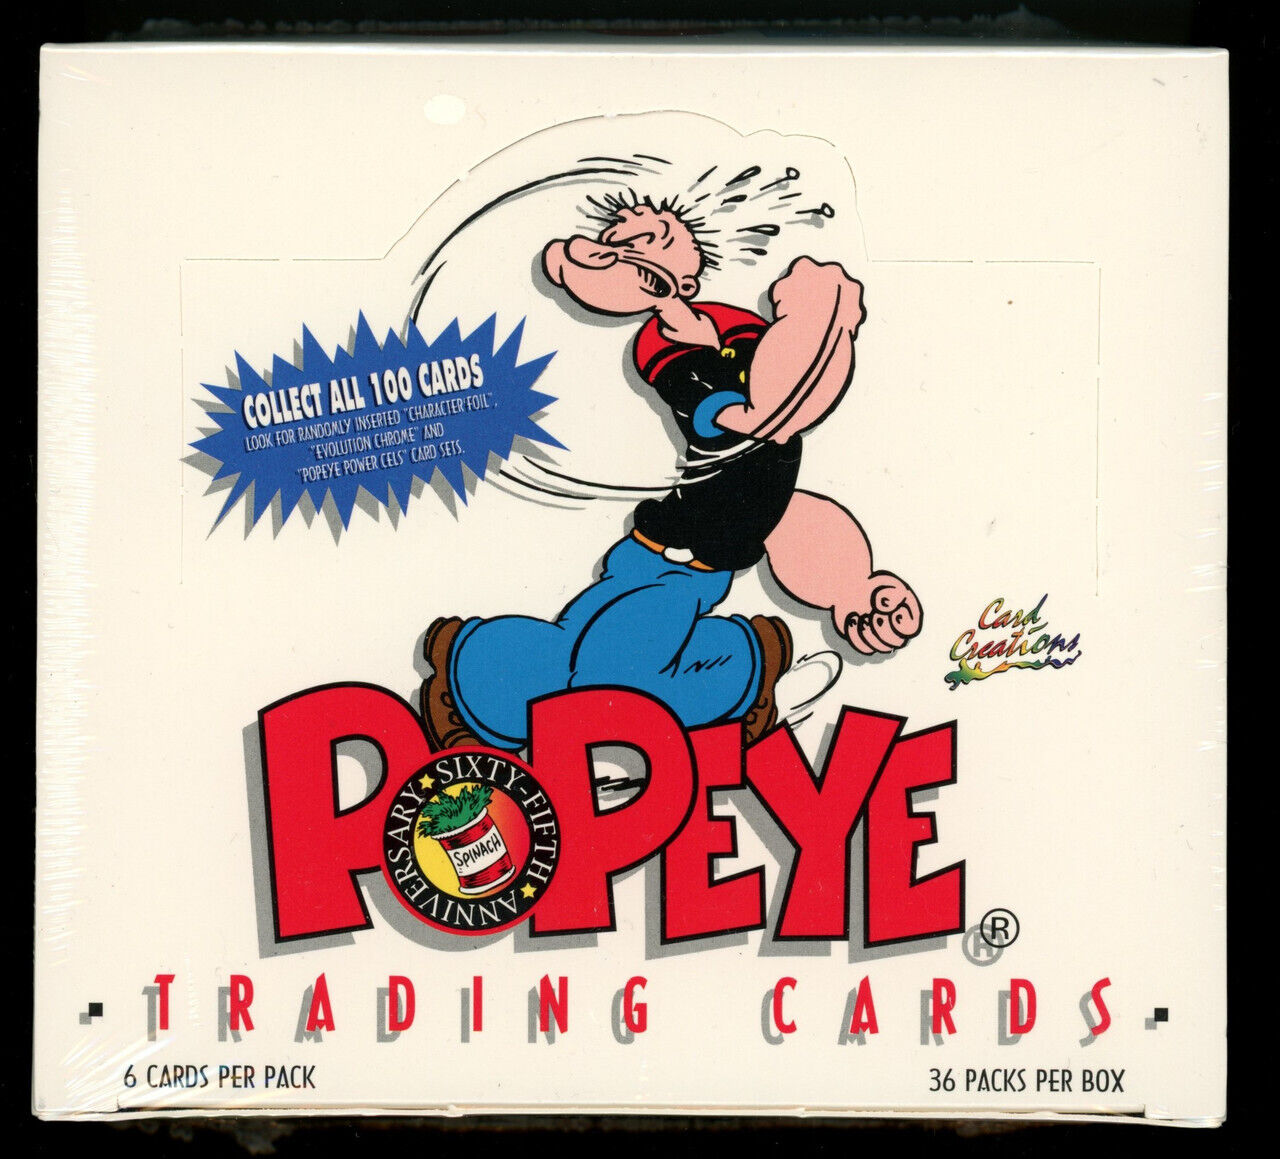 1994 Card Creations Popeye 65th Anniversary Trading Cards Box Factory Sealed